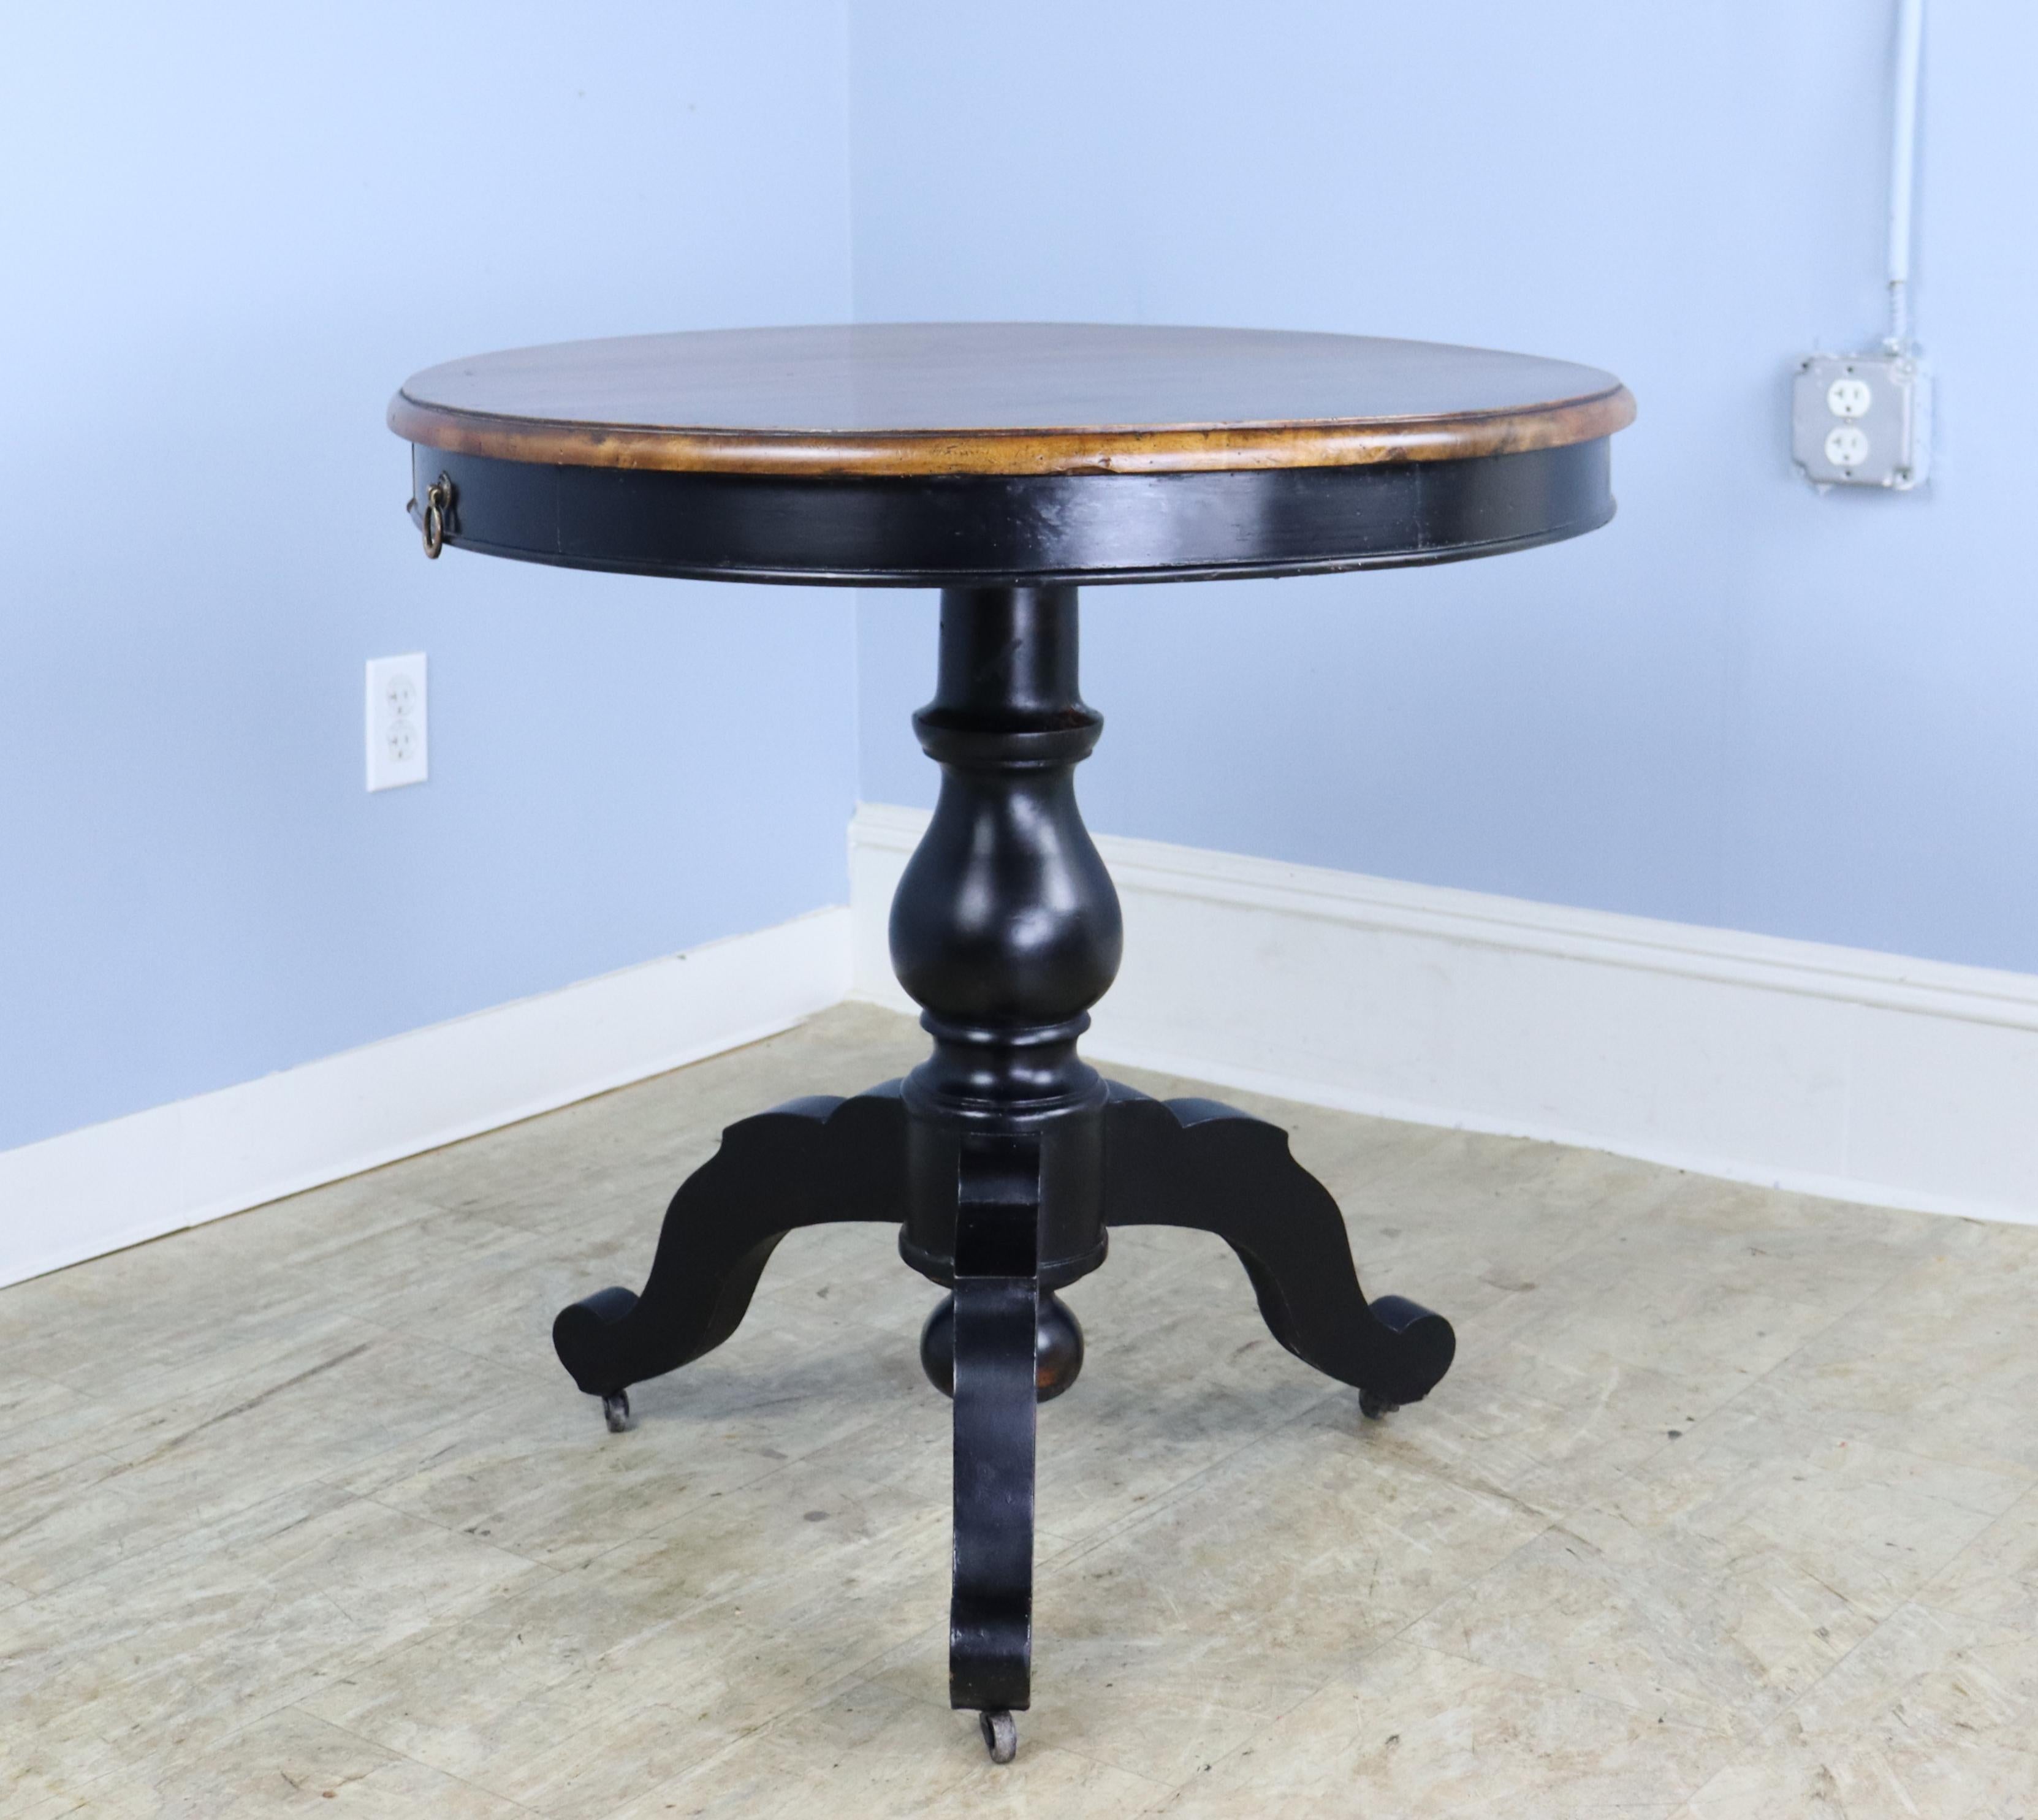 Good looking tripod based French lamp table with a stunning walnut top. Ebonized base has some interesting wear. Two hidden drawers.